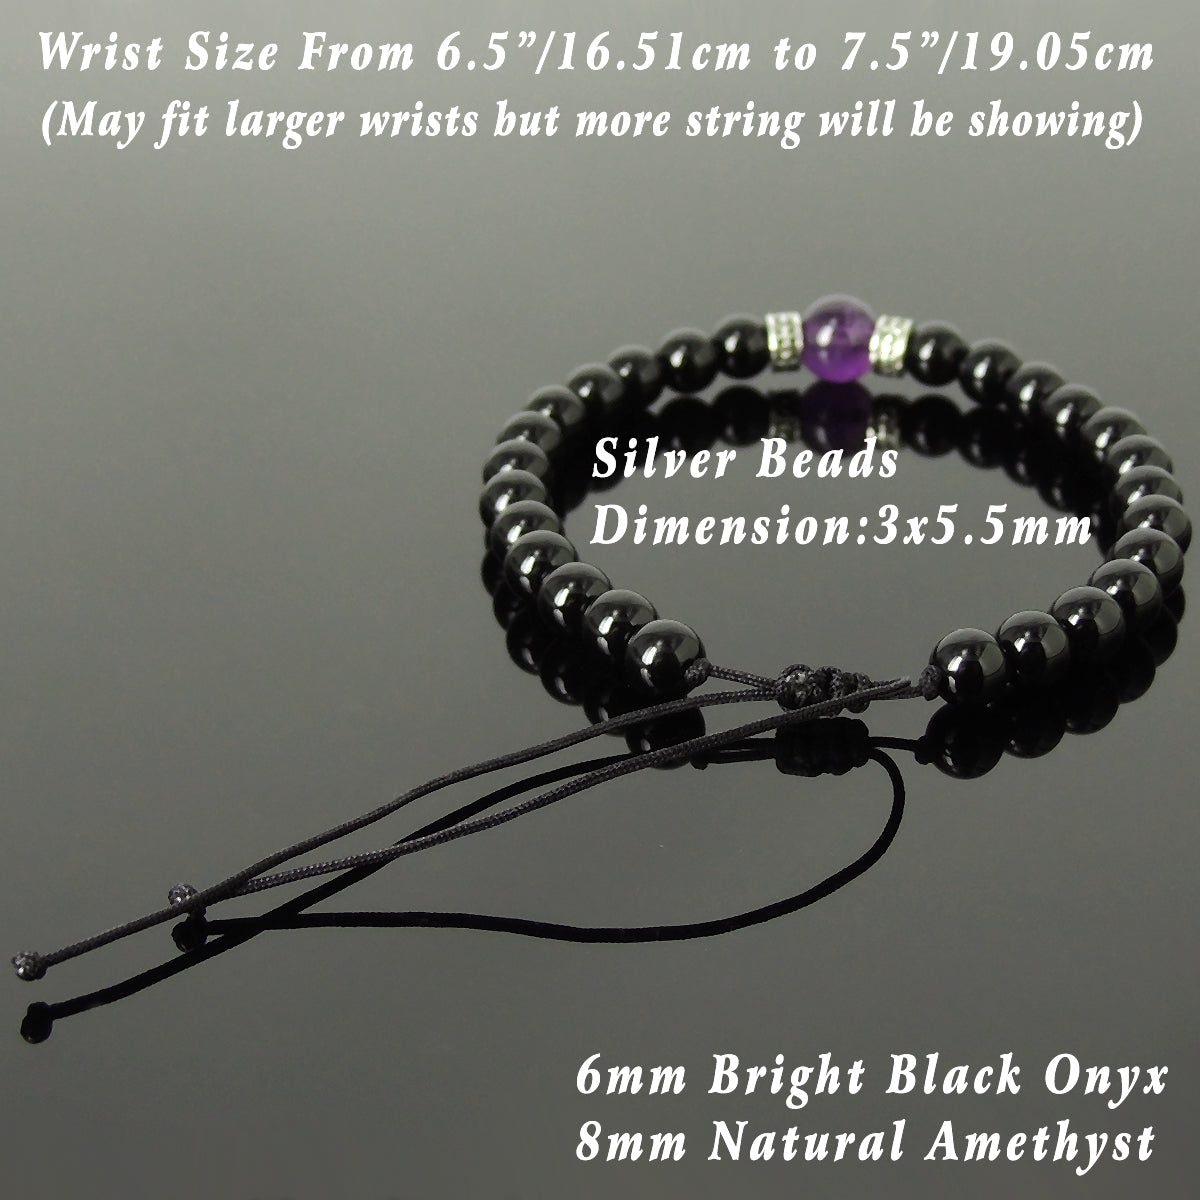 Amethyst & Bright Black Onyx Adjustable Braided Bracelet with S925 Sterling Silver Celtic Cross Spacer Charms - Handmade by Gem & Silver BR1212